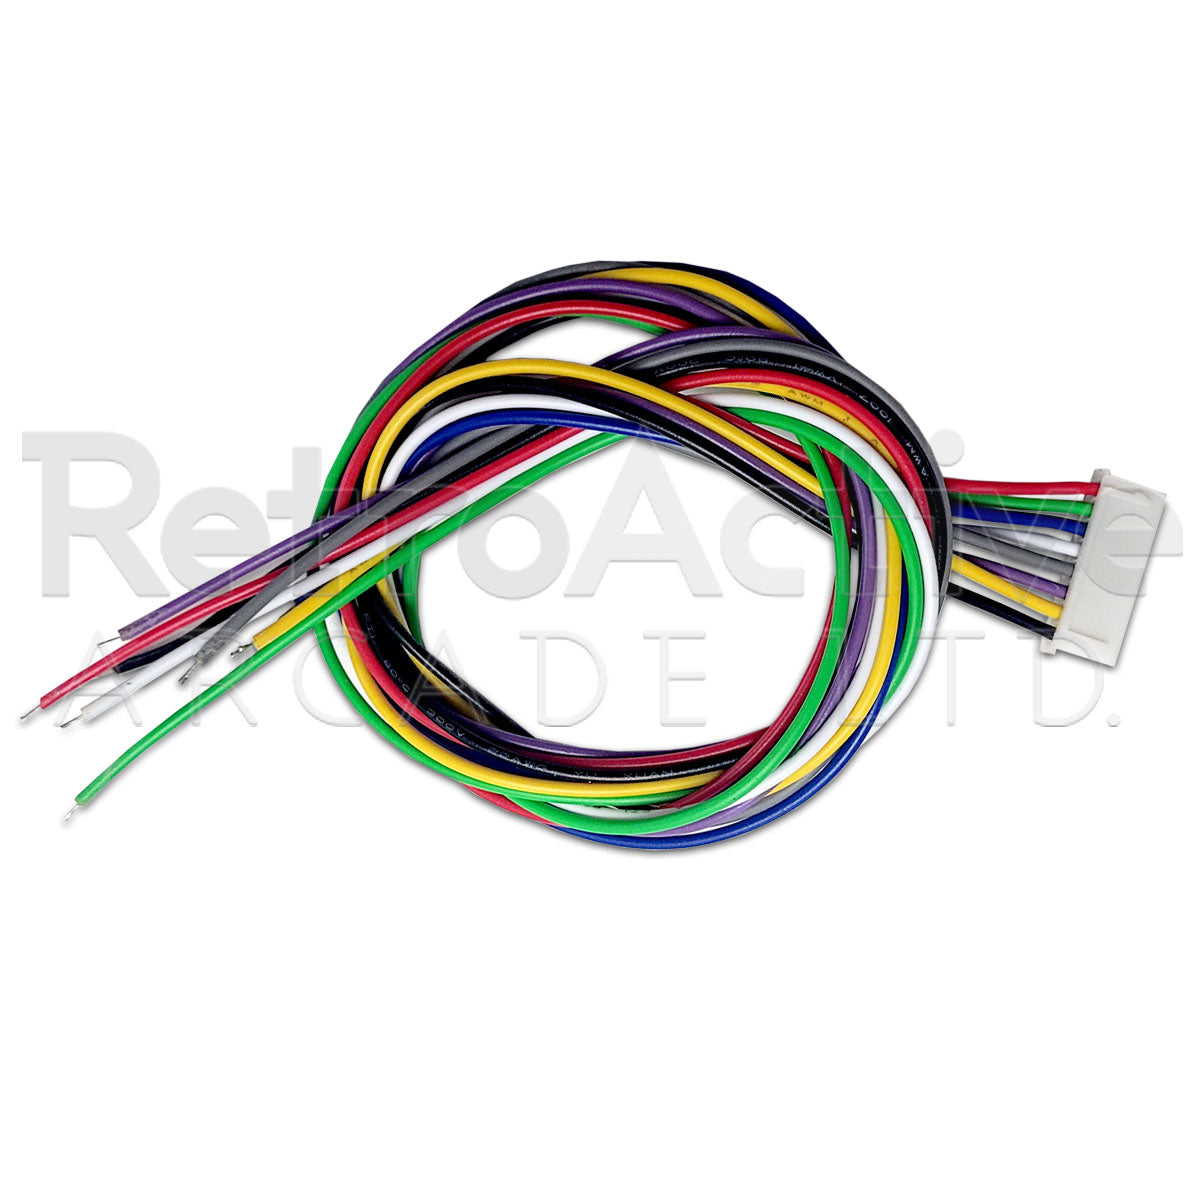 RGBVHS CGA Video Wires Wiring & Harnesses Universal - Retro Active Arcade